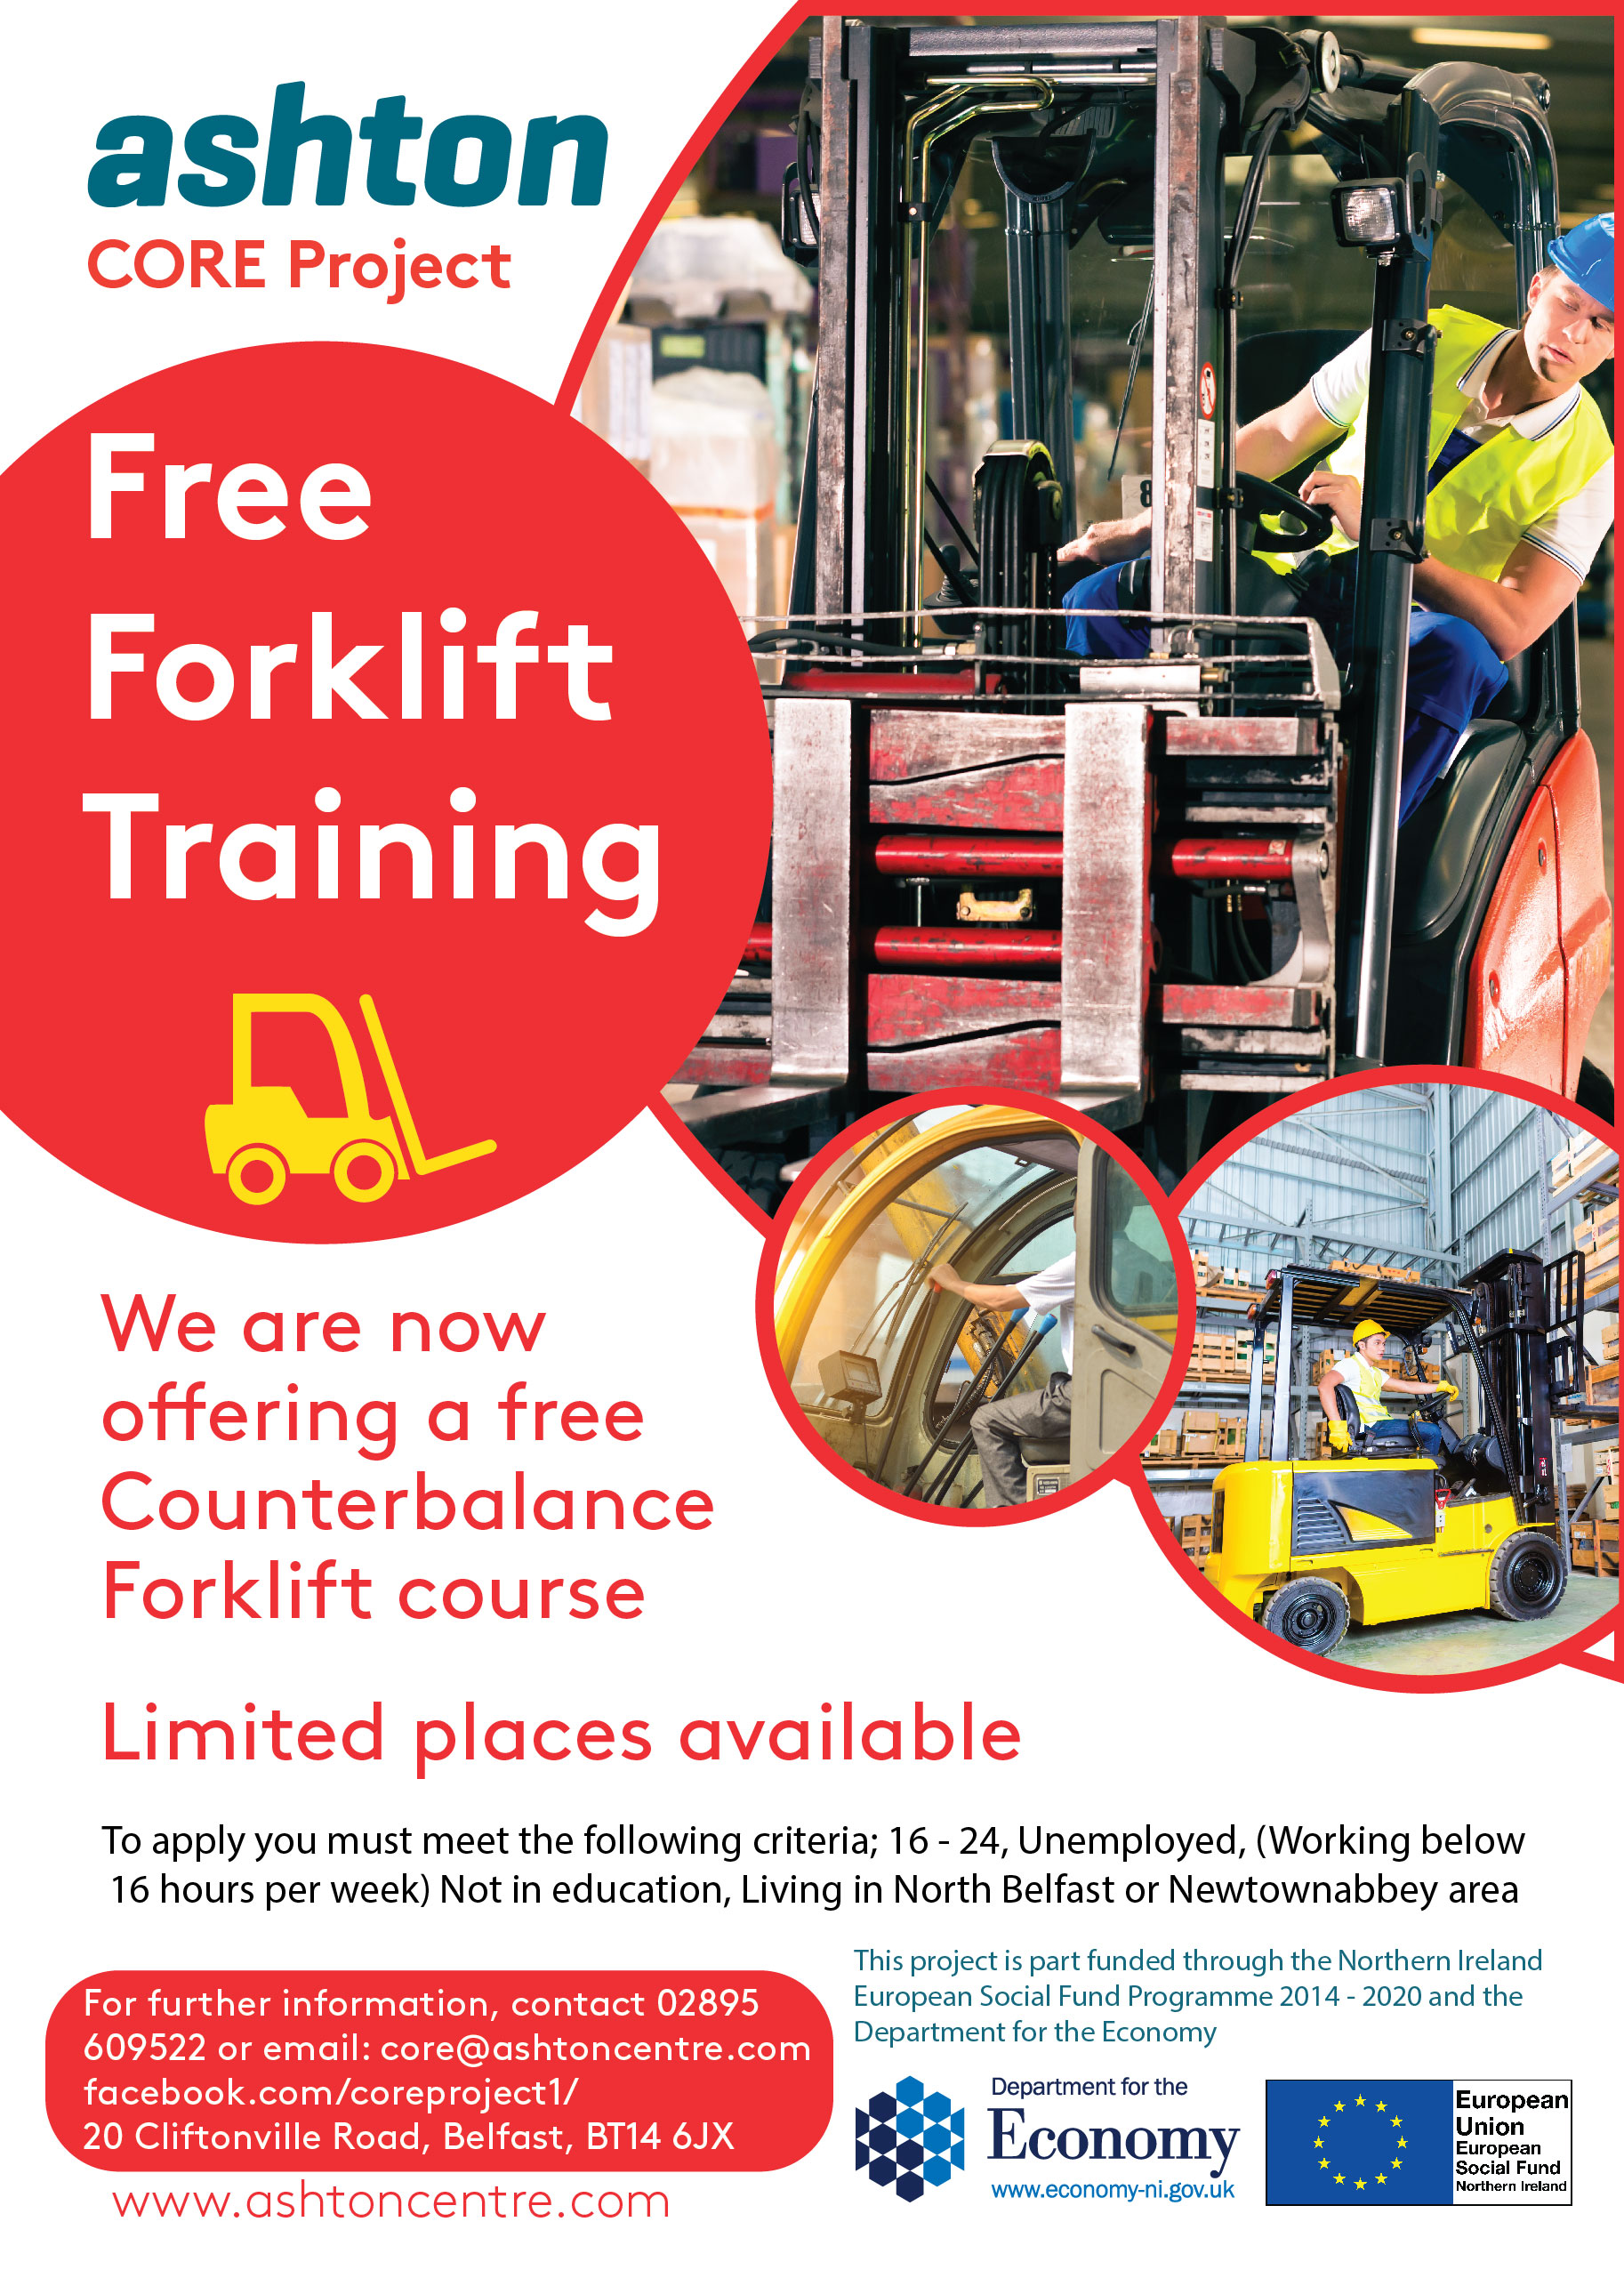 Who offers the best Forklift Training Course Belfast?